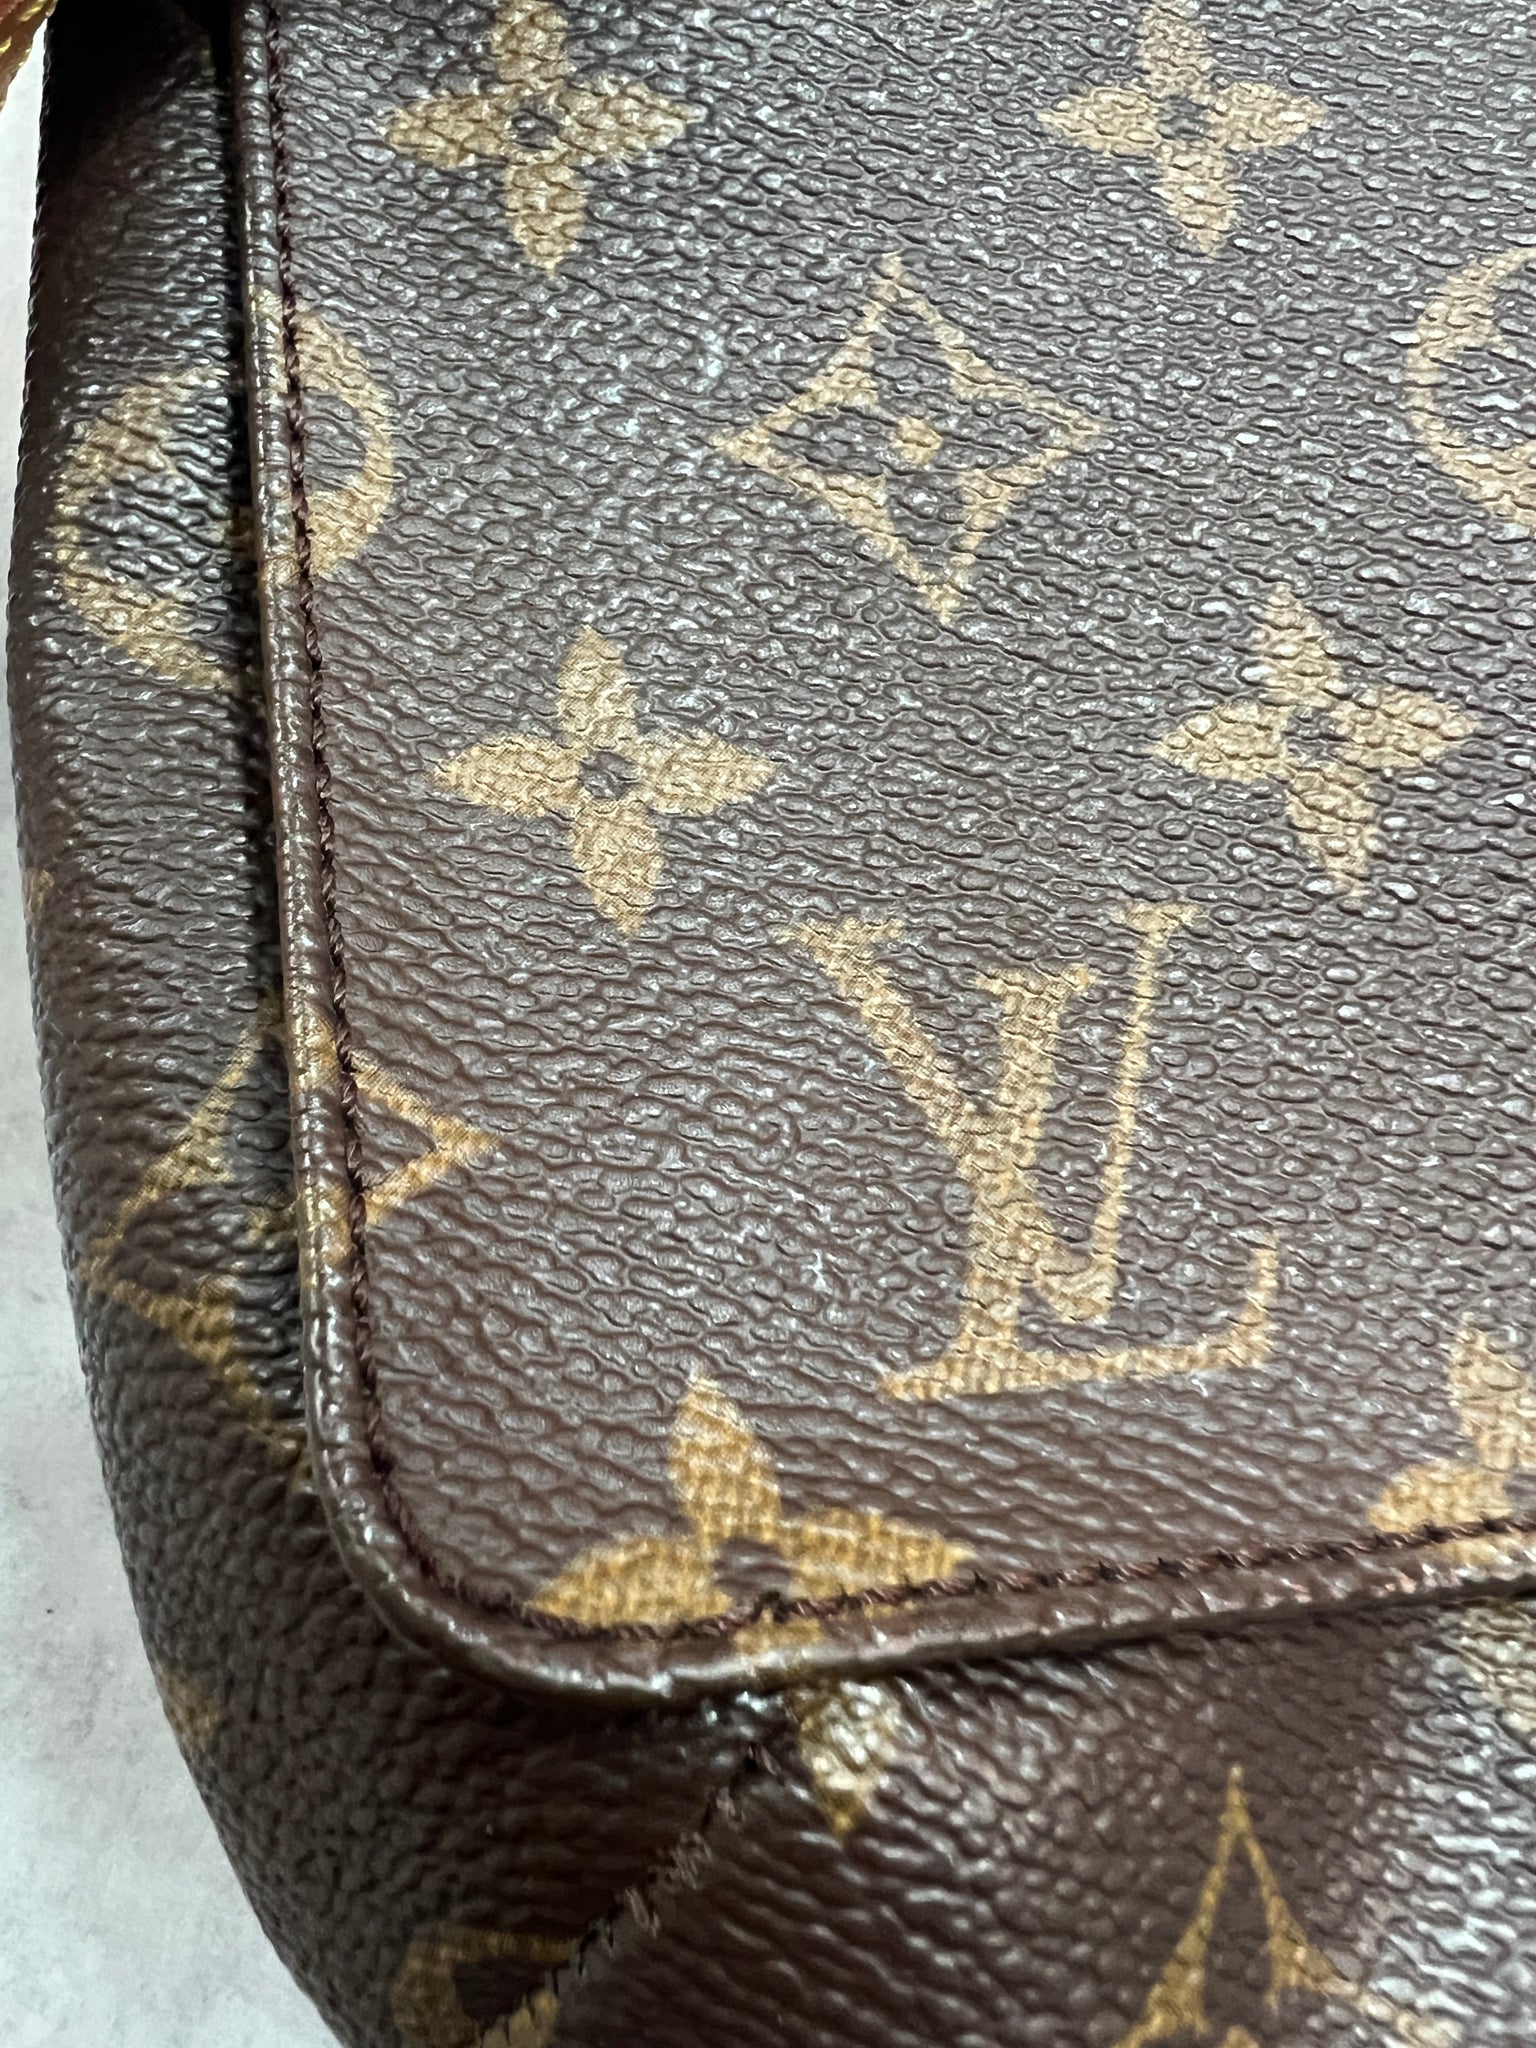 Louis Vuitton 2006 pre-owned Musette crossbody bag - ShopStyle